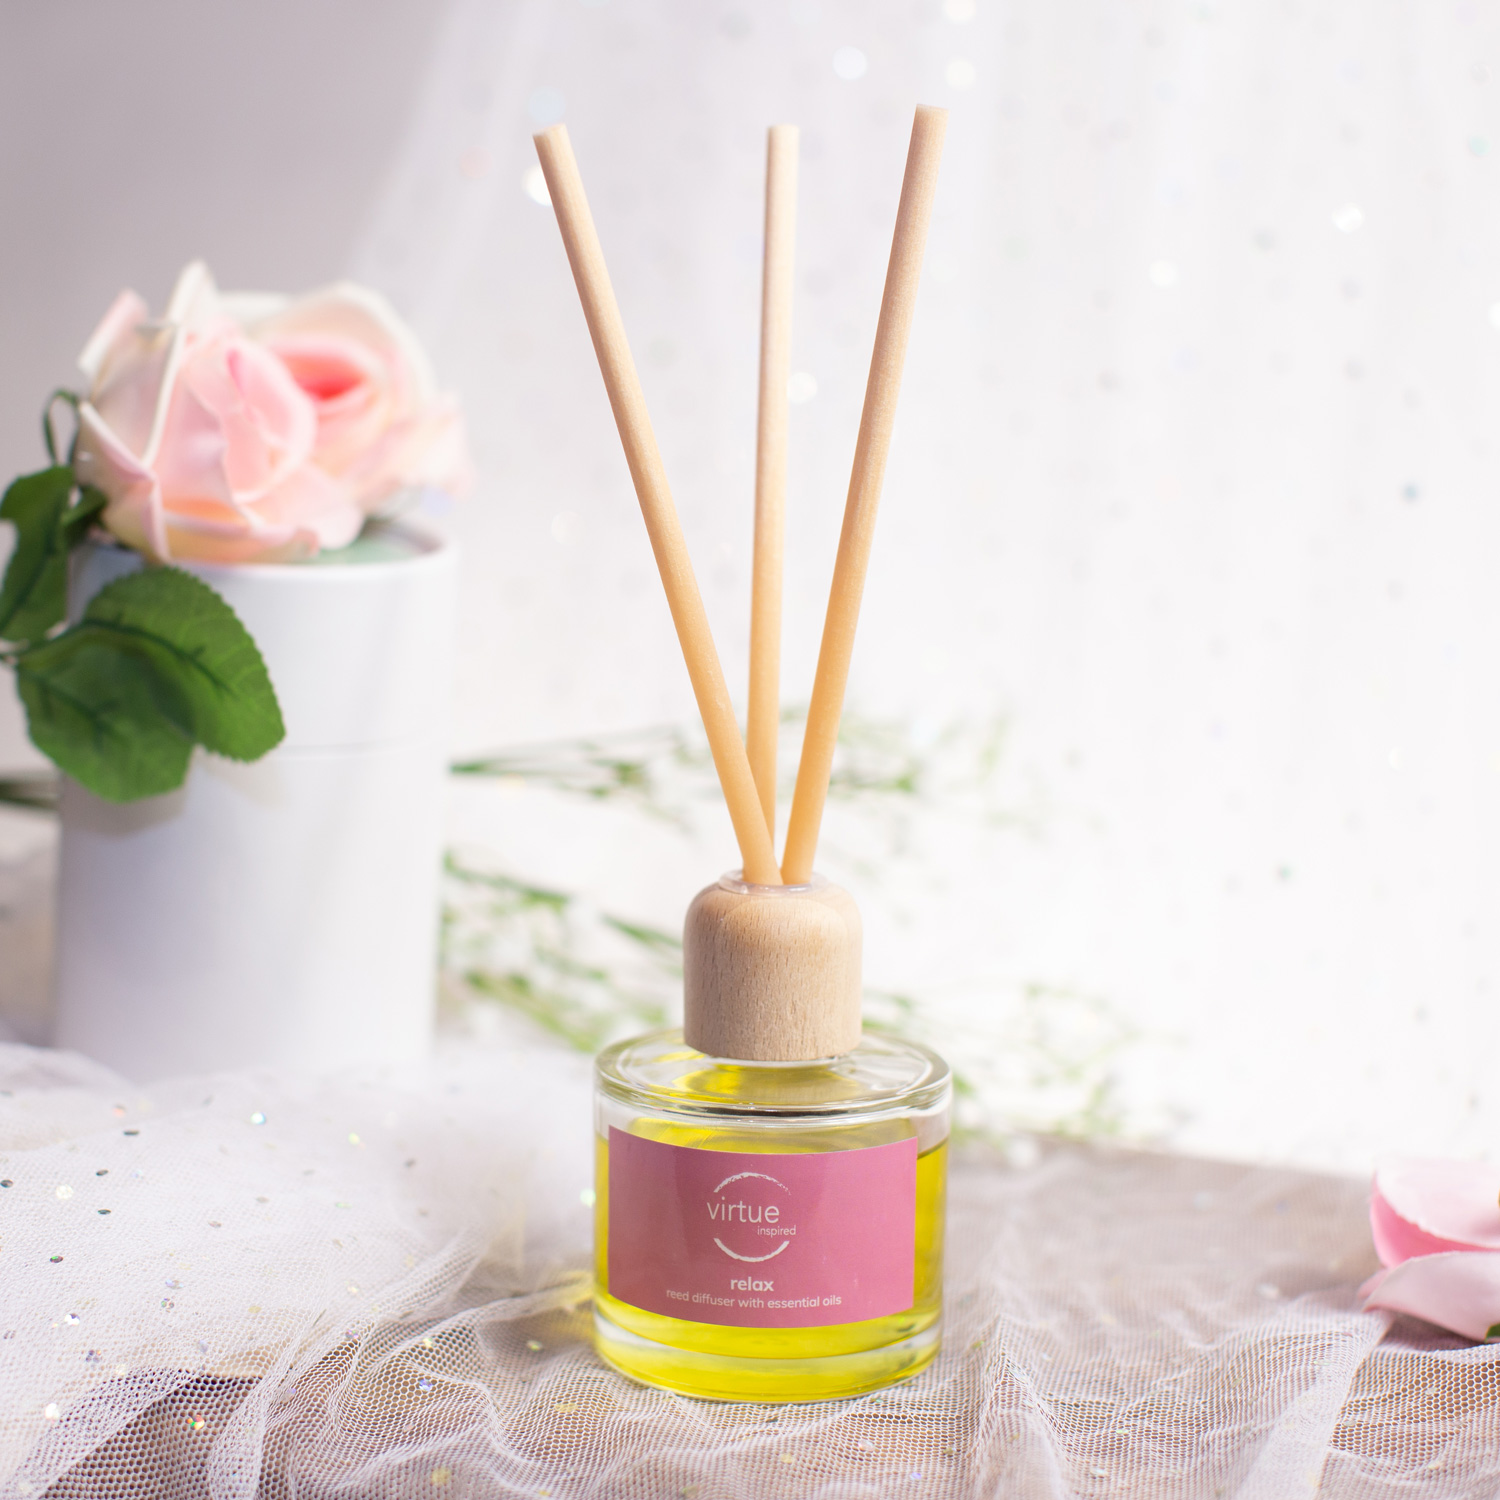 Relax Reed Diffuser - Virtue Inspired